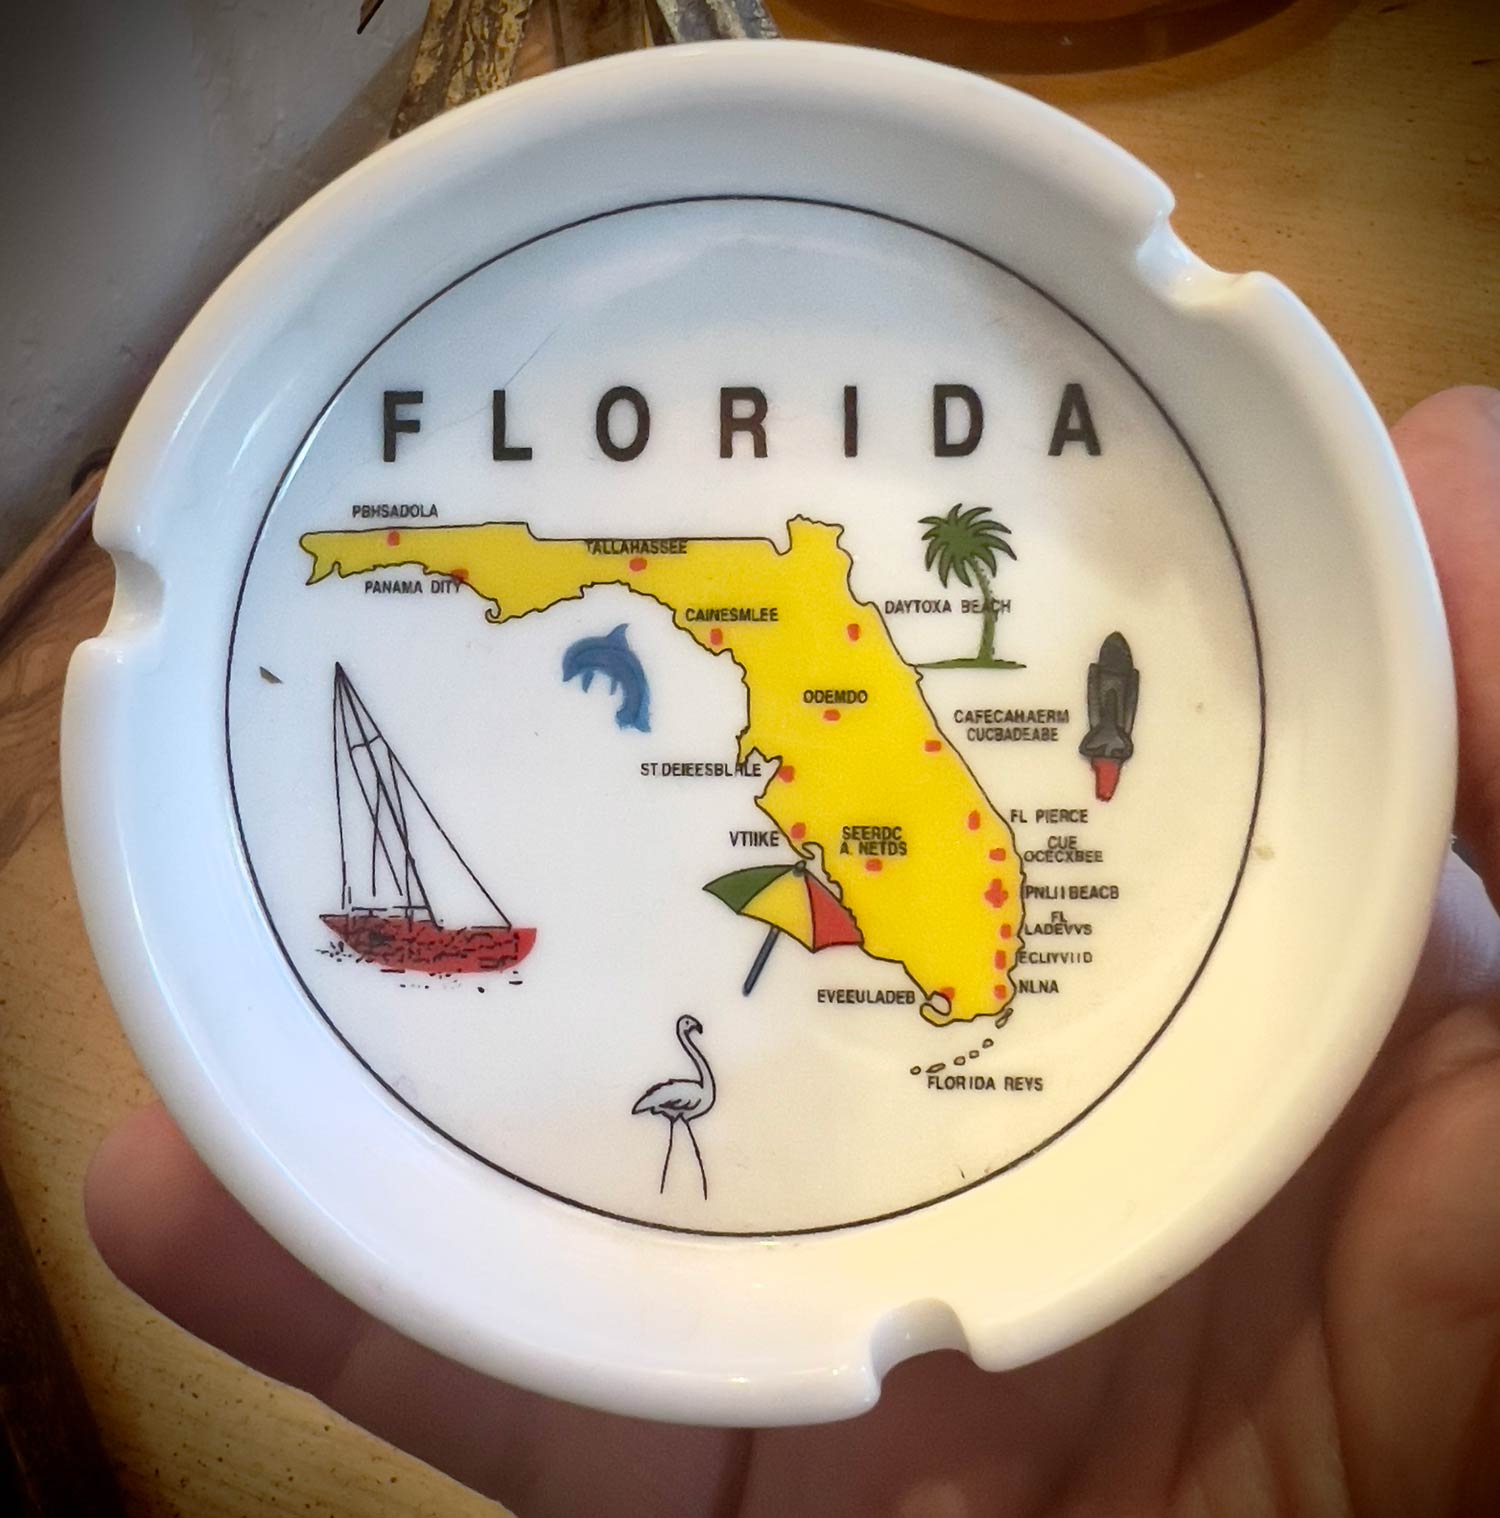 A treasured family heirloom, our Florida souvenir ashtray, ca. 1983. (Look closely)